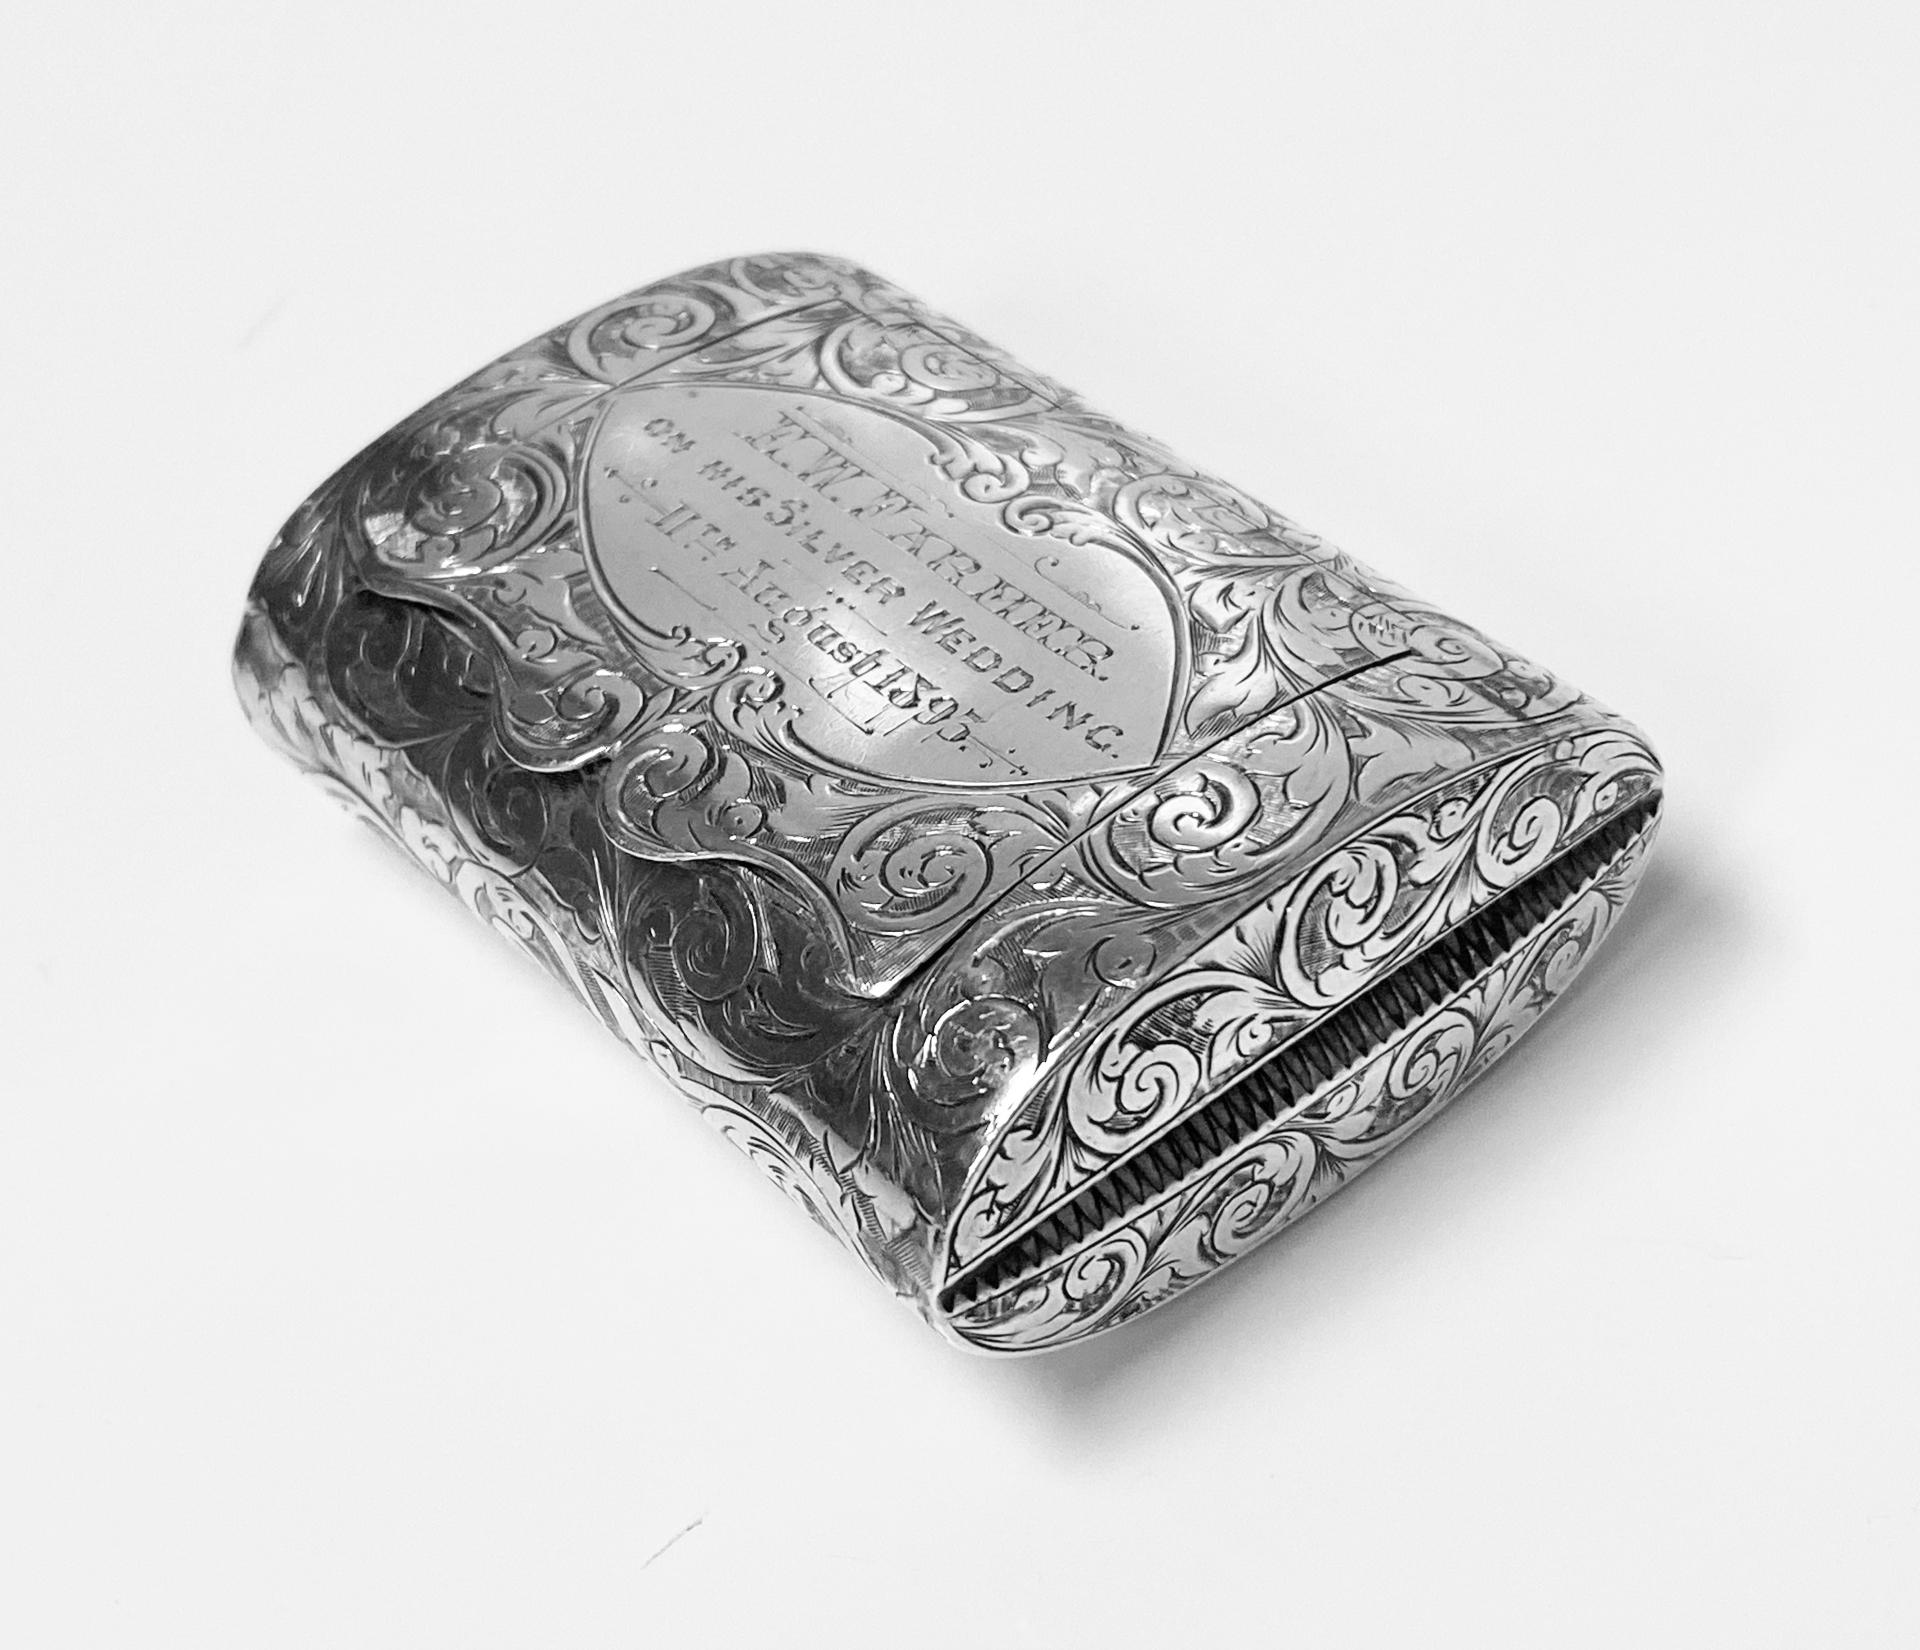 Antique Silver Vesta Case in form of clutch Purse Birmingham 1892 Thomas Hayes. The shaped ovoid form vesta richly decorated with engraved foliage, inscribed E.W.farmer on his Silver Wedding 11th August 1893. Full hallmarks to gilded interior and